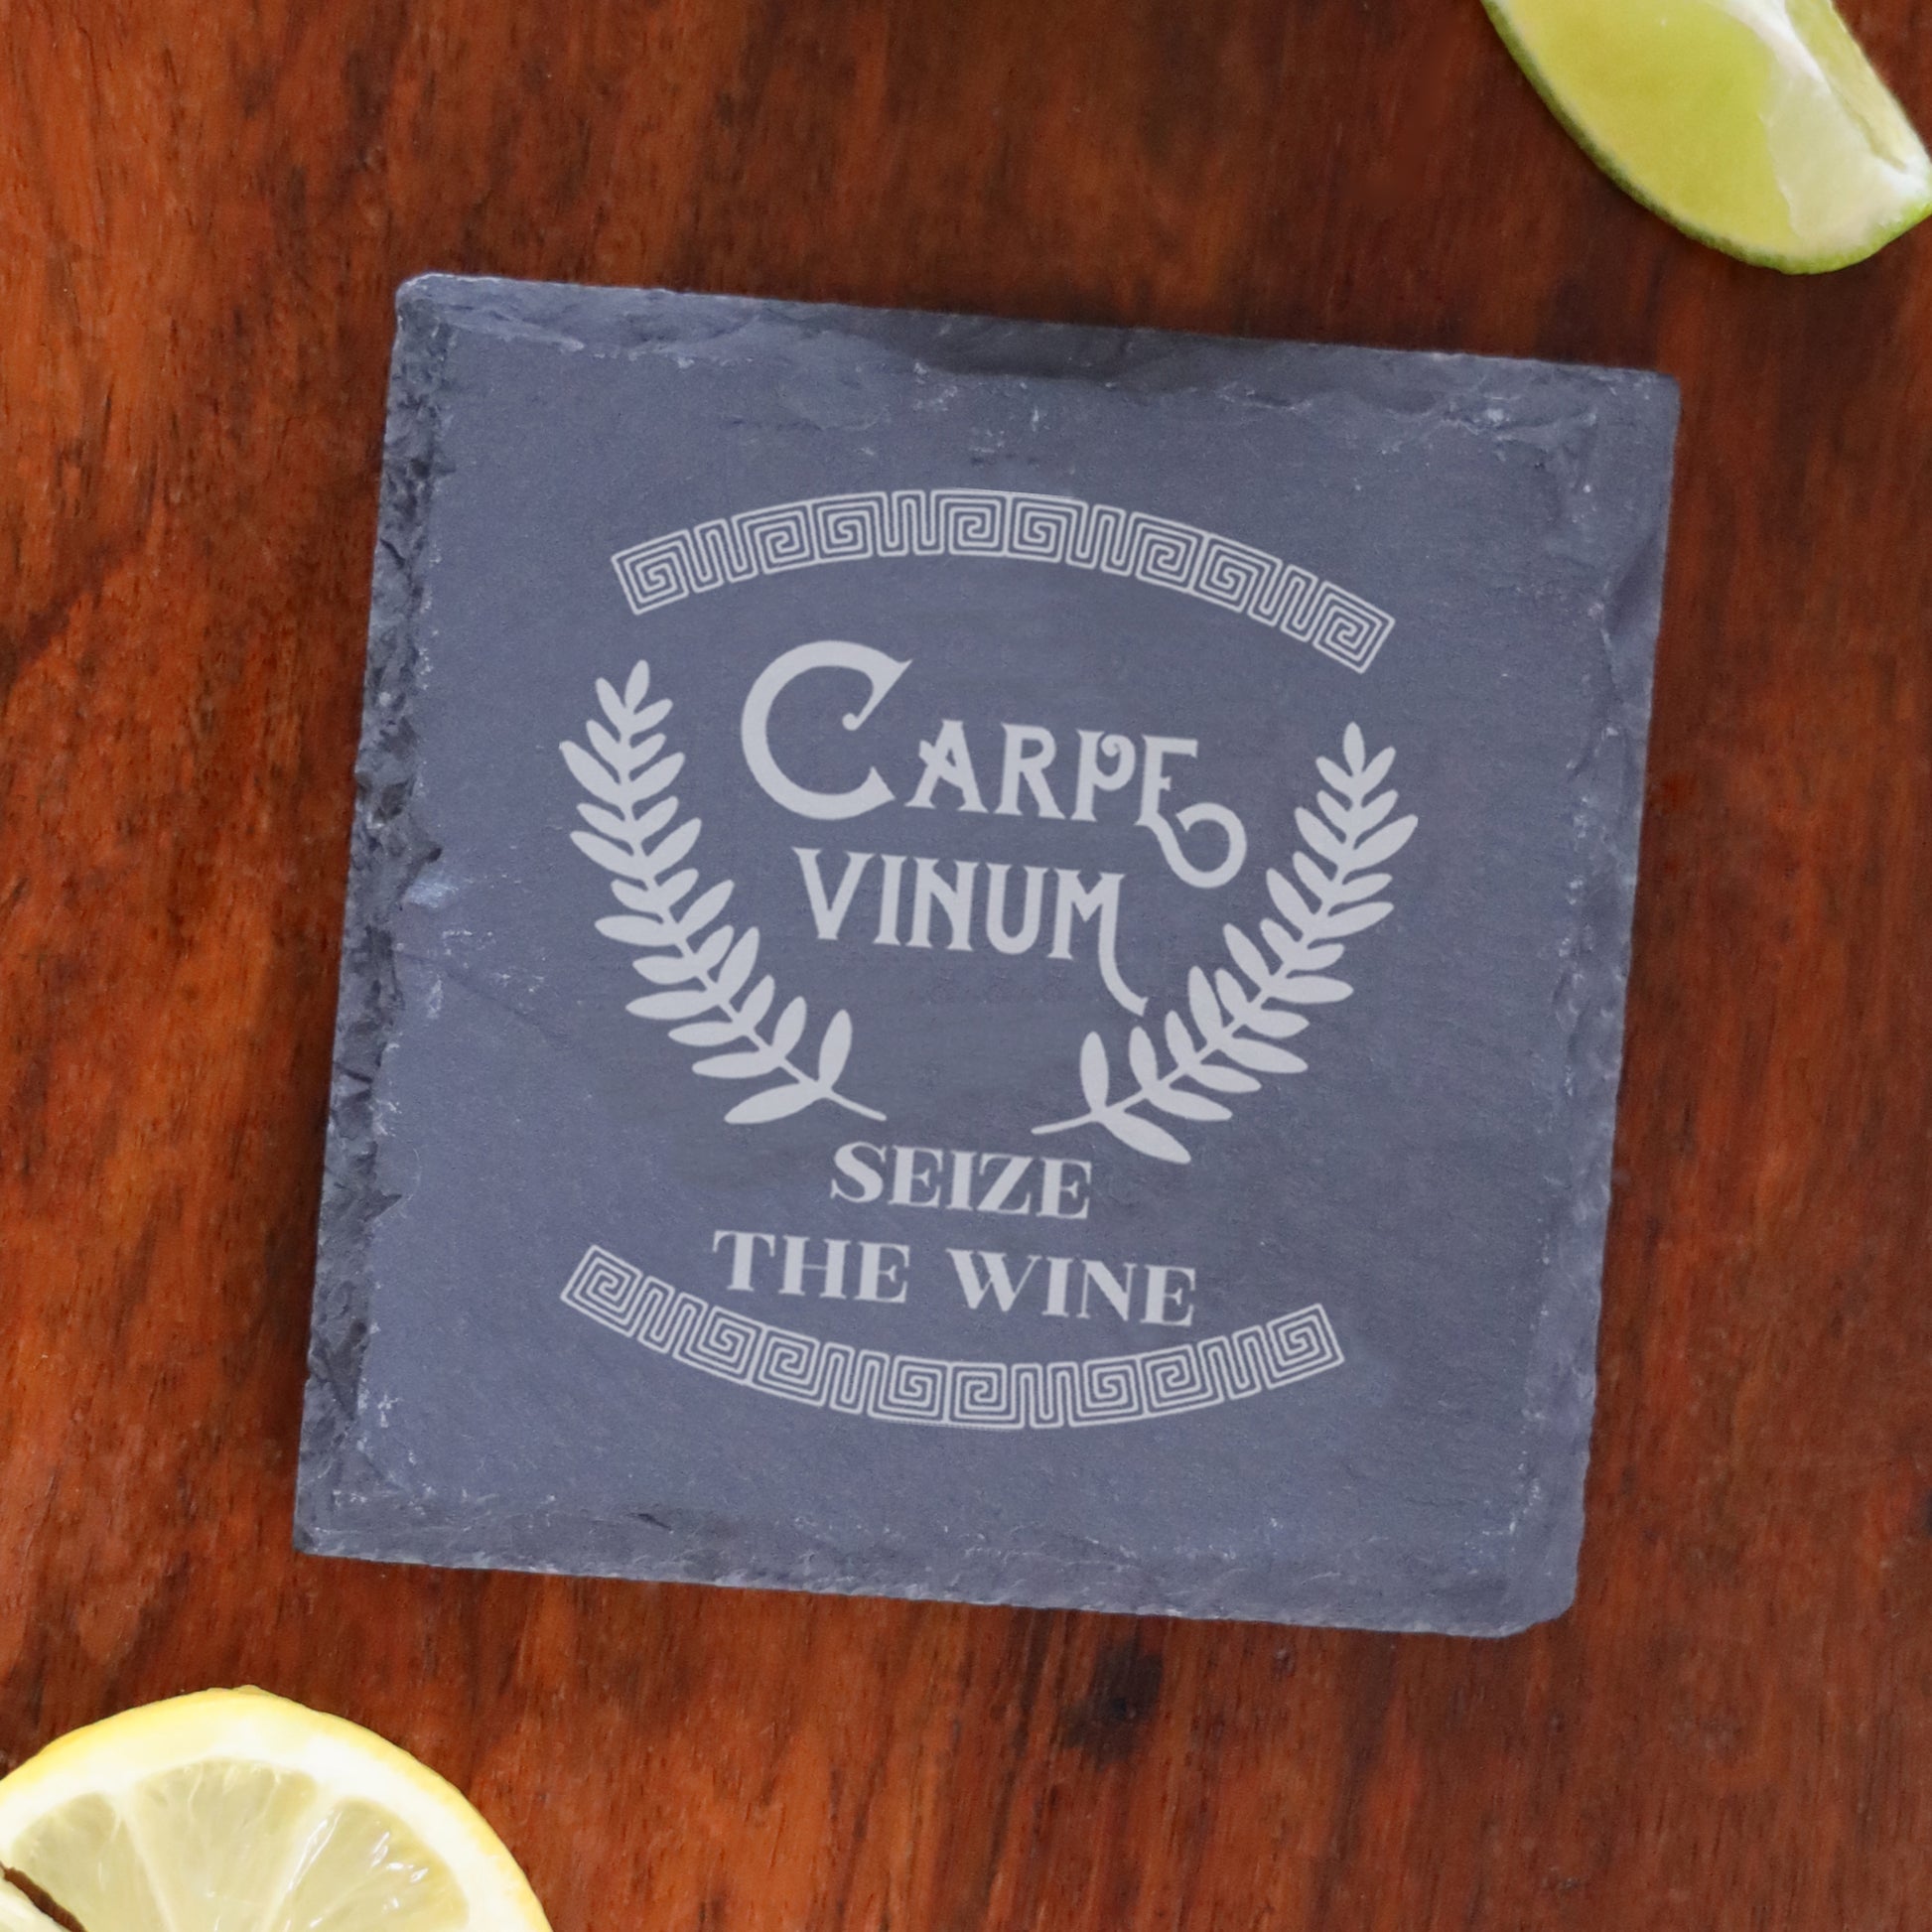 Funny Engraved "Carpe Vinum Seize The Wine" Novelty Wine Glass and/or Coaster Set  - Always Looking Good - Square Coaster Only  